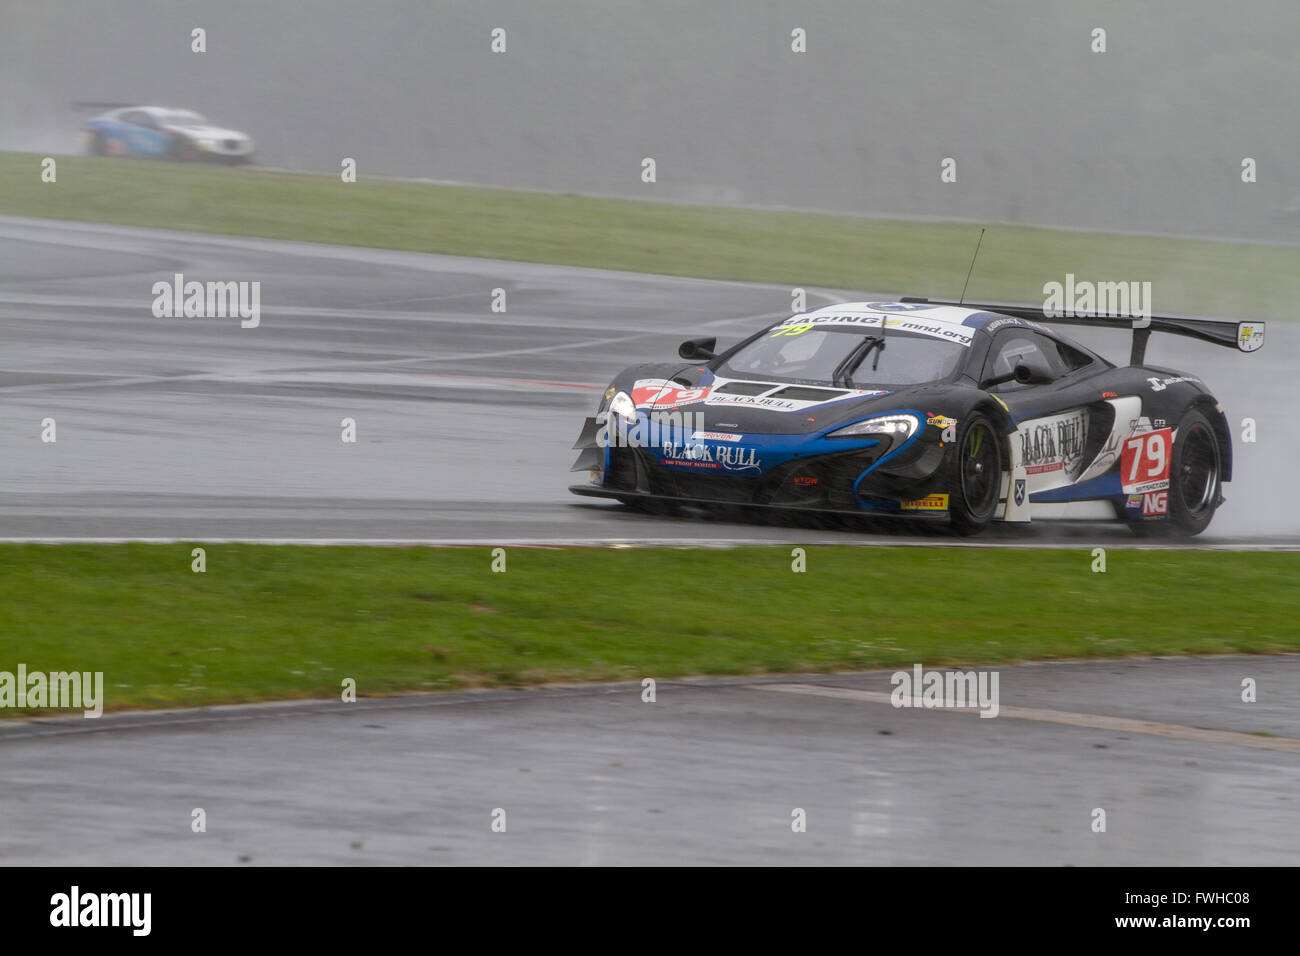 Silverstone, UK. 12th June, 2016. The #79 Black Bull Ecurie Ecosse McLaren 650S GT3 of Alasdair McCaig/Rob Bell heading onto the Hanger straight in tricky weather conditions Credit:  steven roe/Alamy Live News Stock Photo